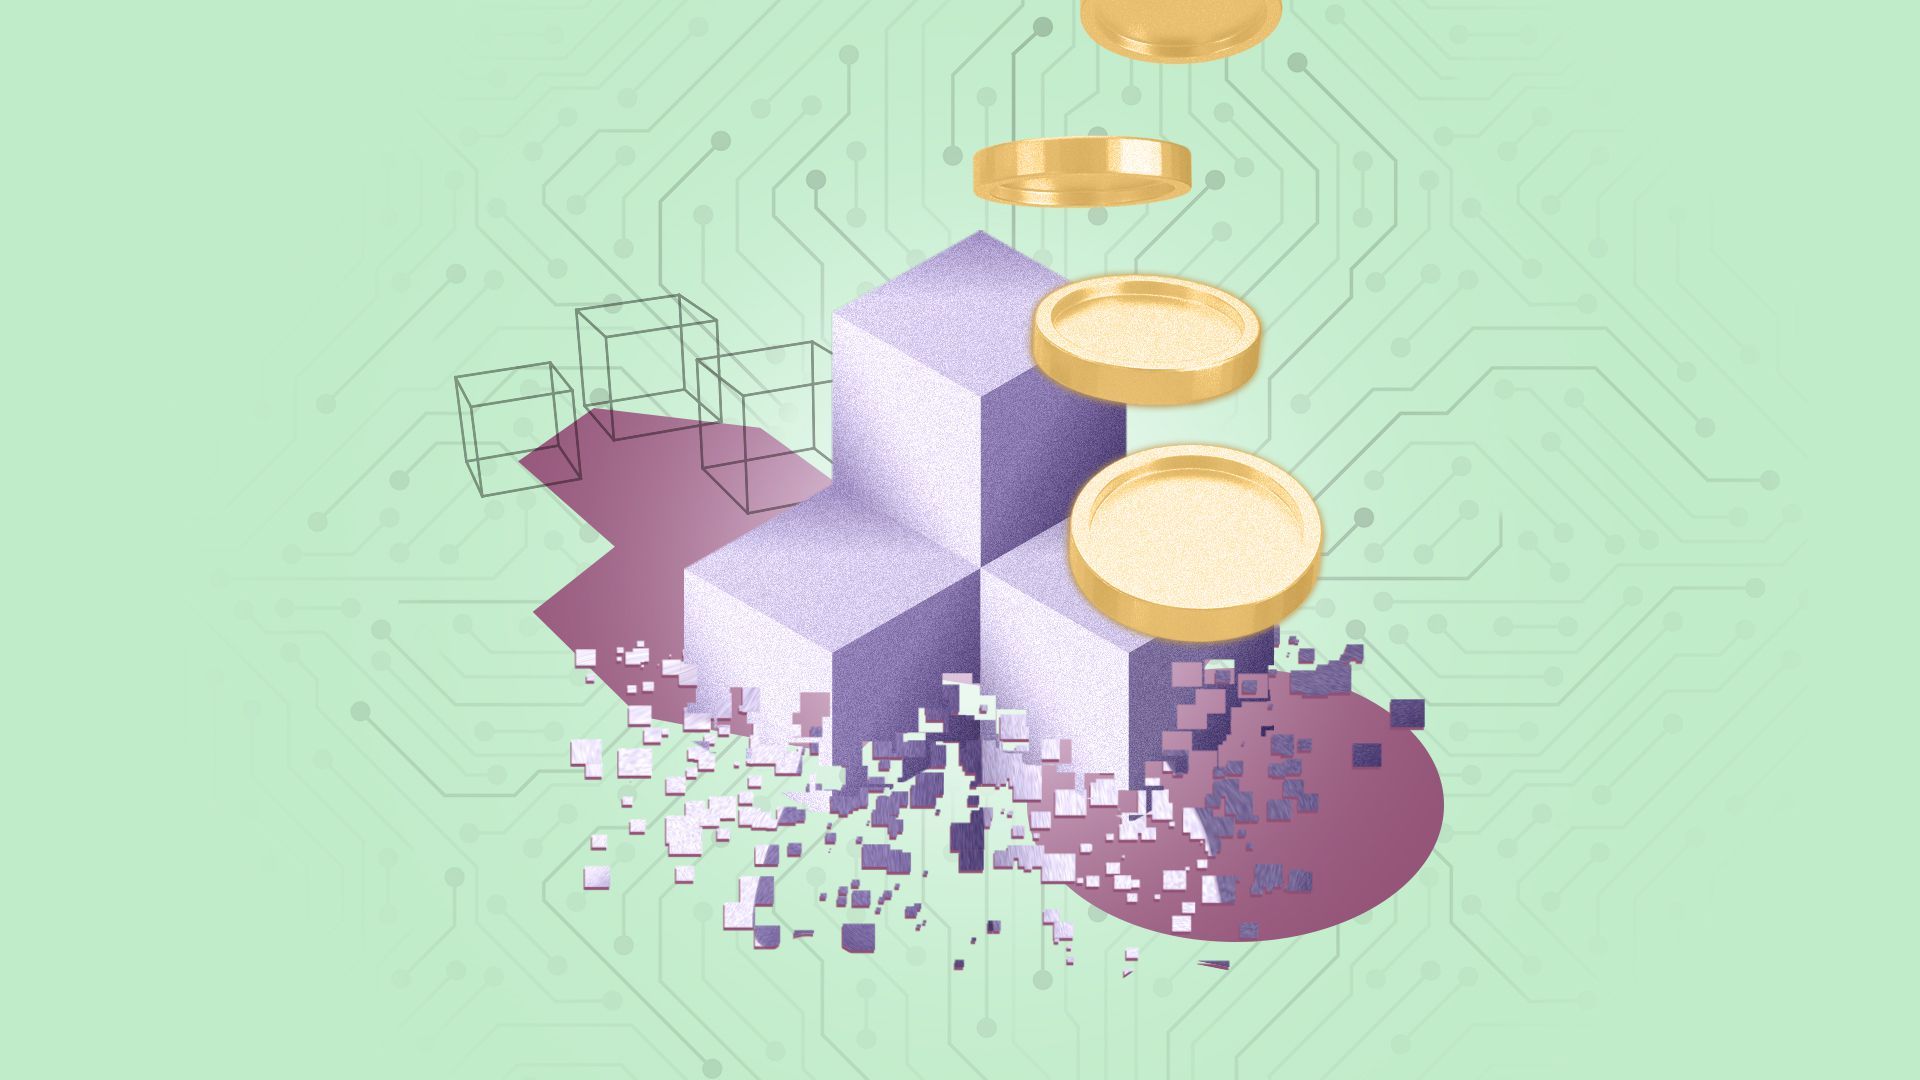 Illustration of cubes that become pixelated, digital coins, assorted shapes, and digital infrastructure.